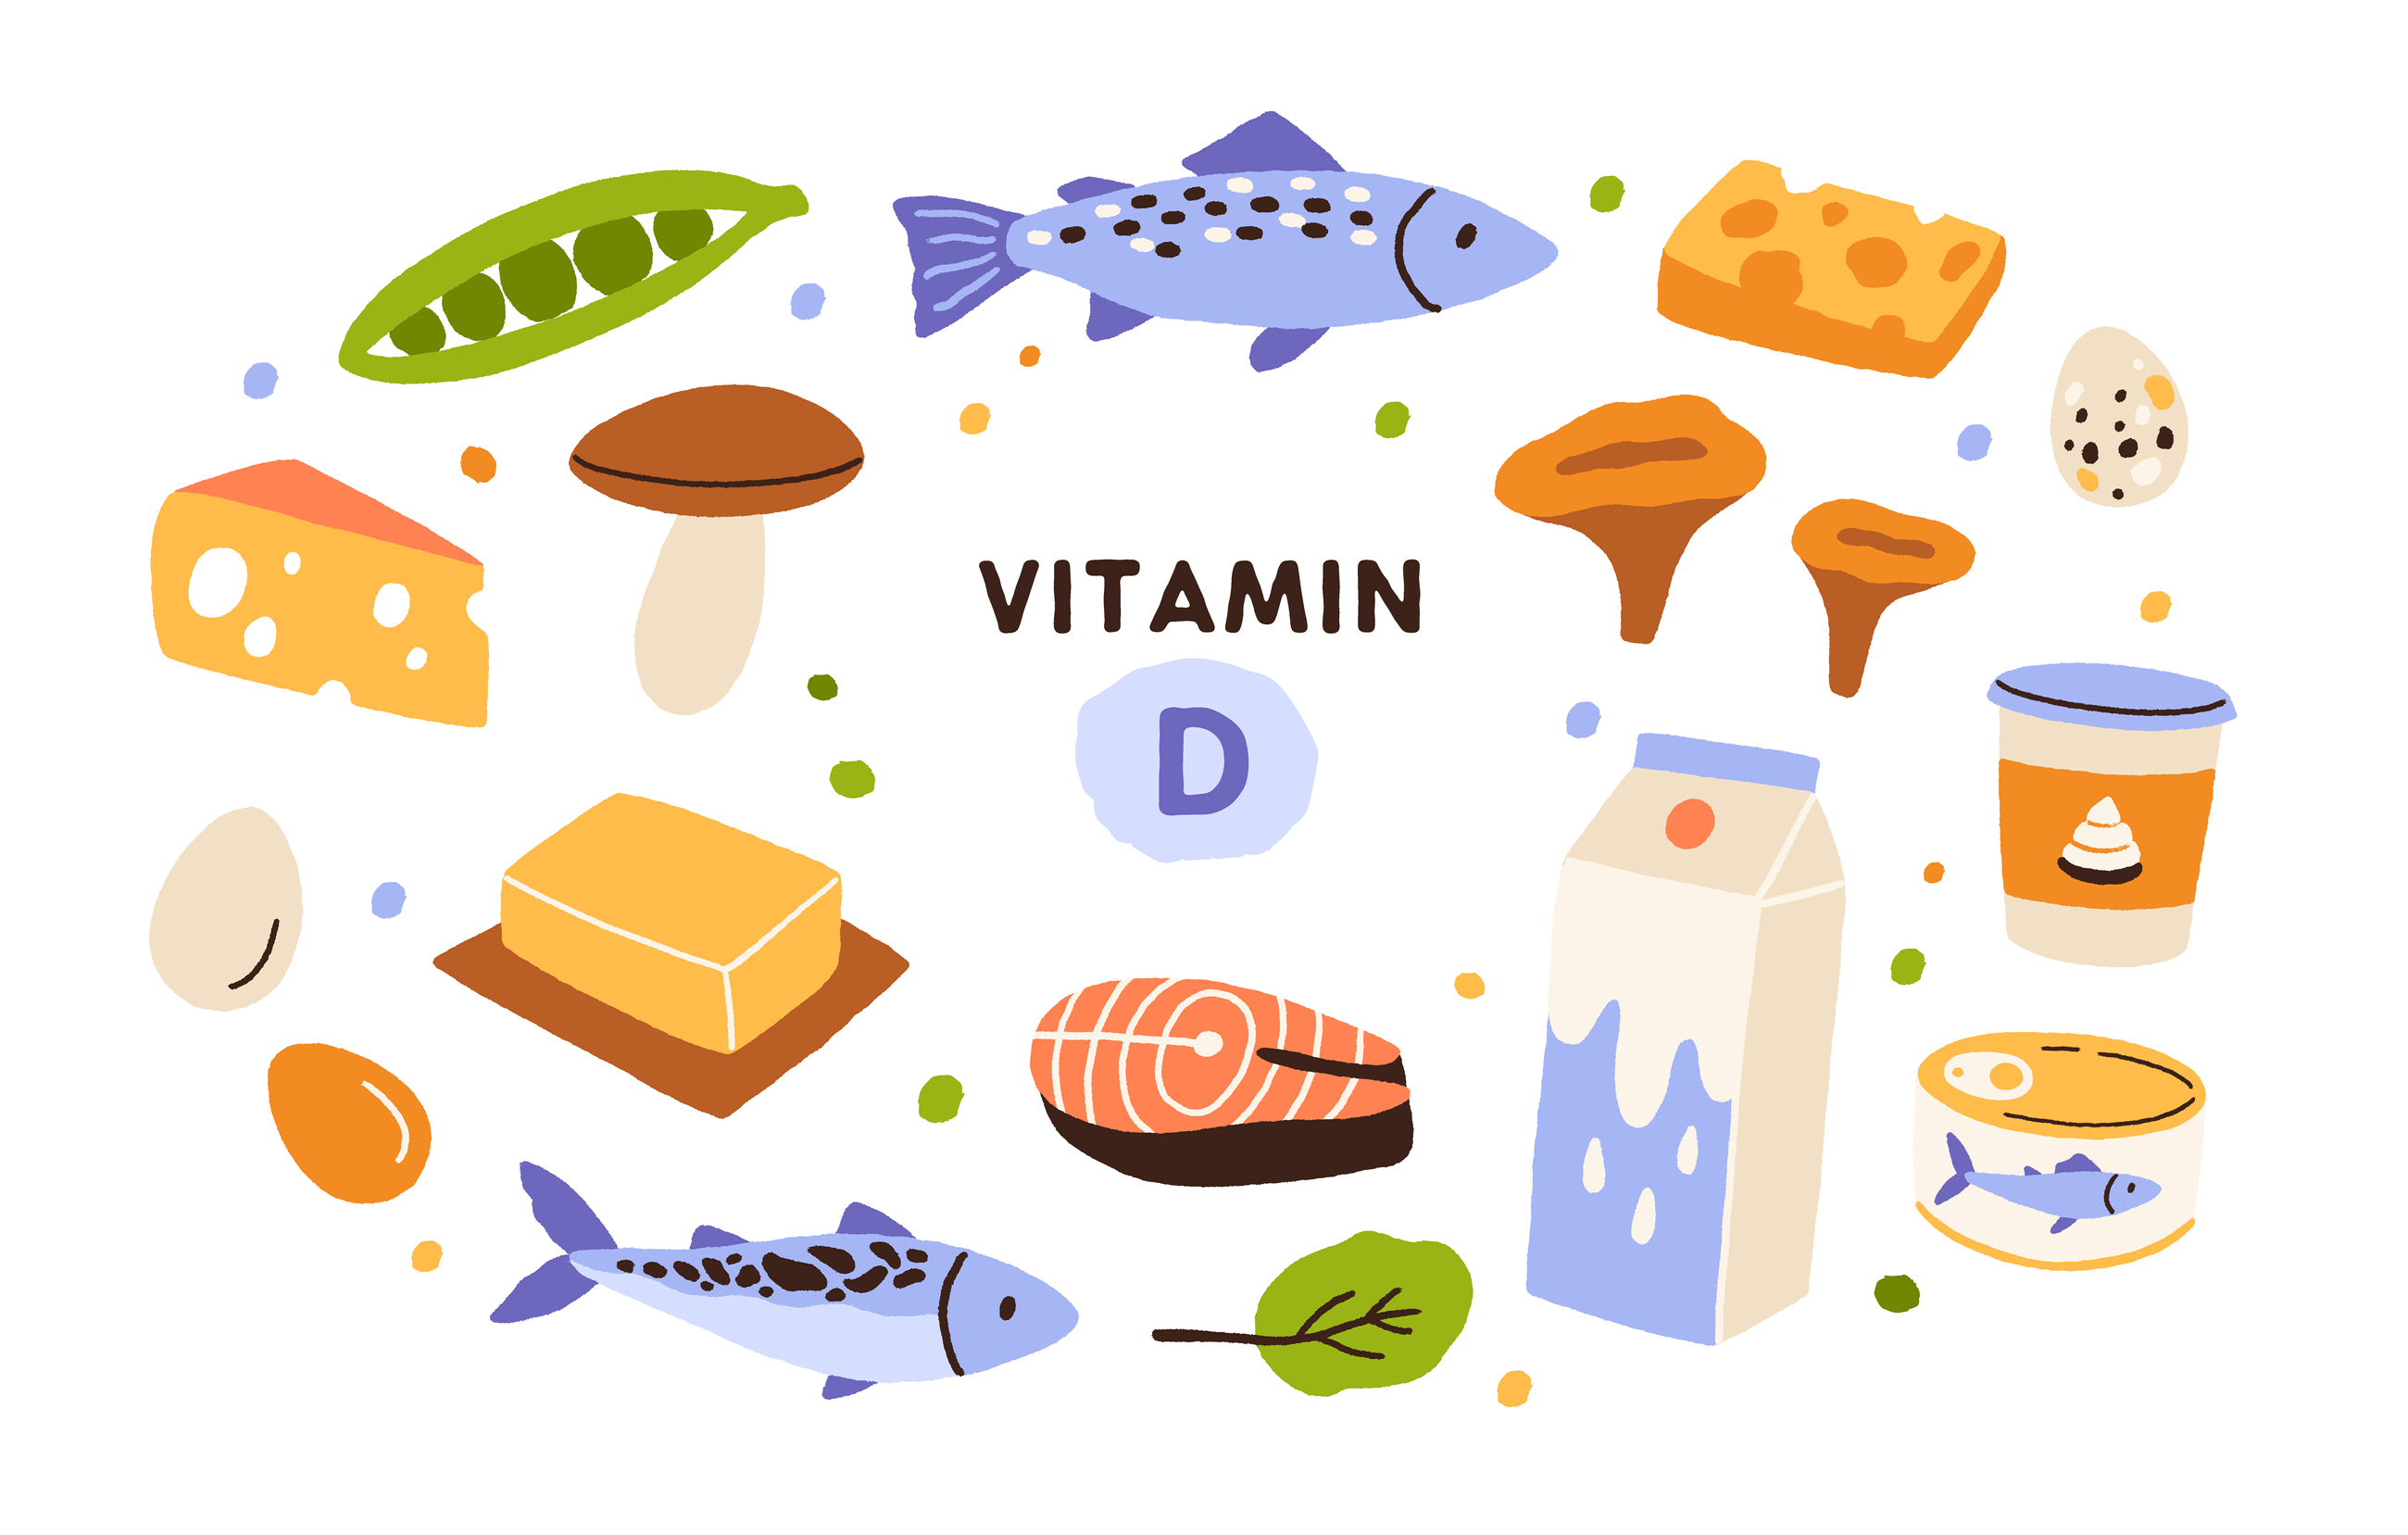 bone health,dietary reference intakes,vitamin d rich foods,vitamin d concentrations,cod liver oil,high blood pressure,birth outcomes,food sources,best foods